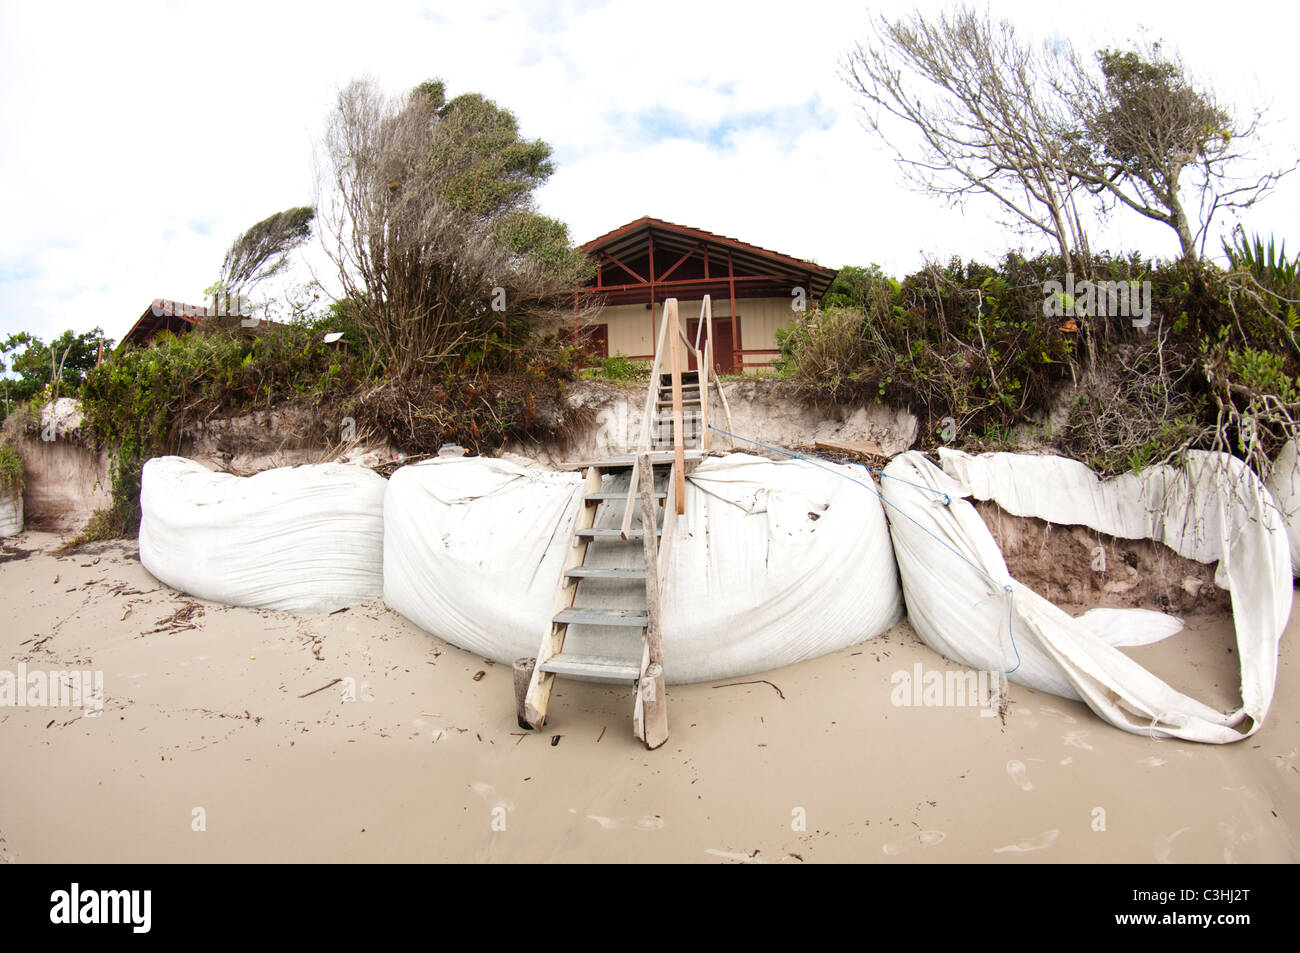 Barrier sand bags trying to stop sea level increasing at Ilha do Mel, Paraná, Brazil. Stock Photo